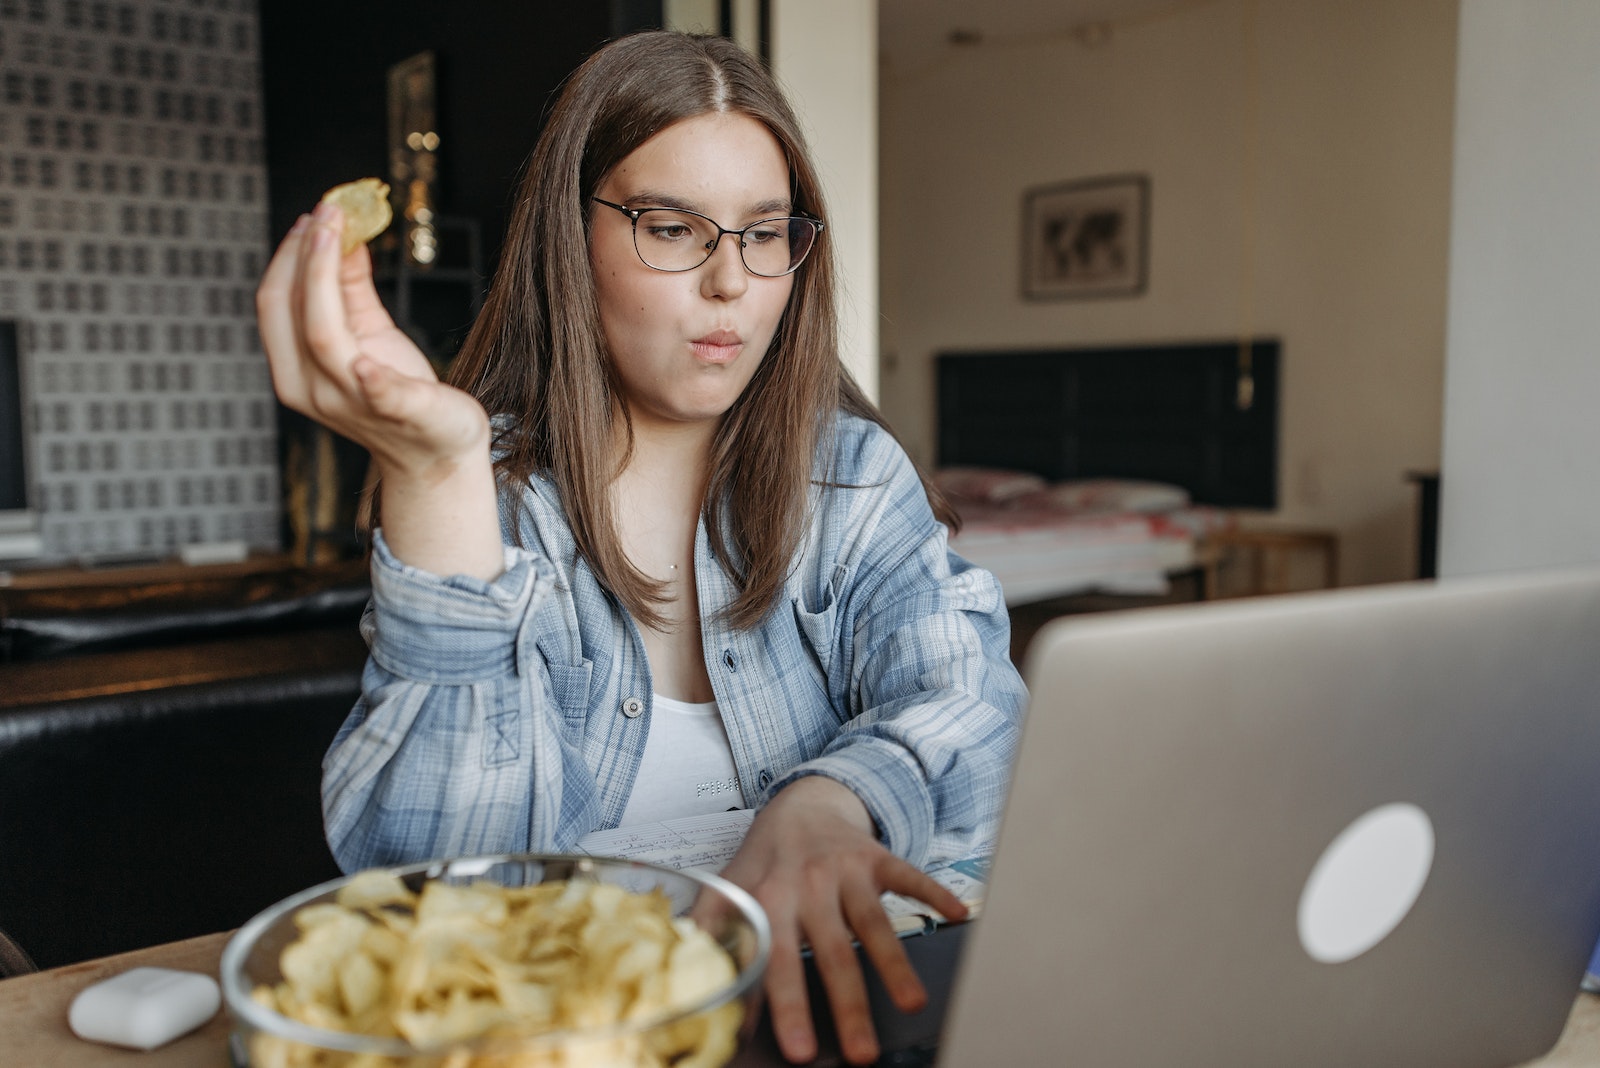 Woman Eating Chips while Using a Laptop